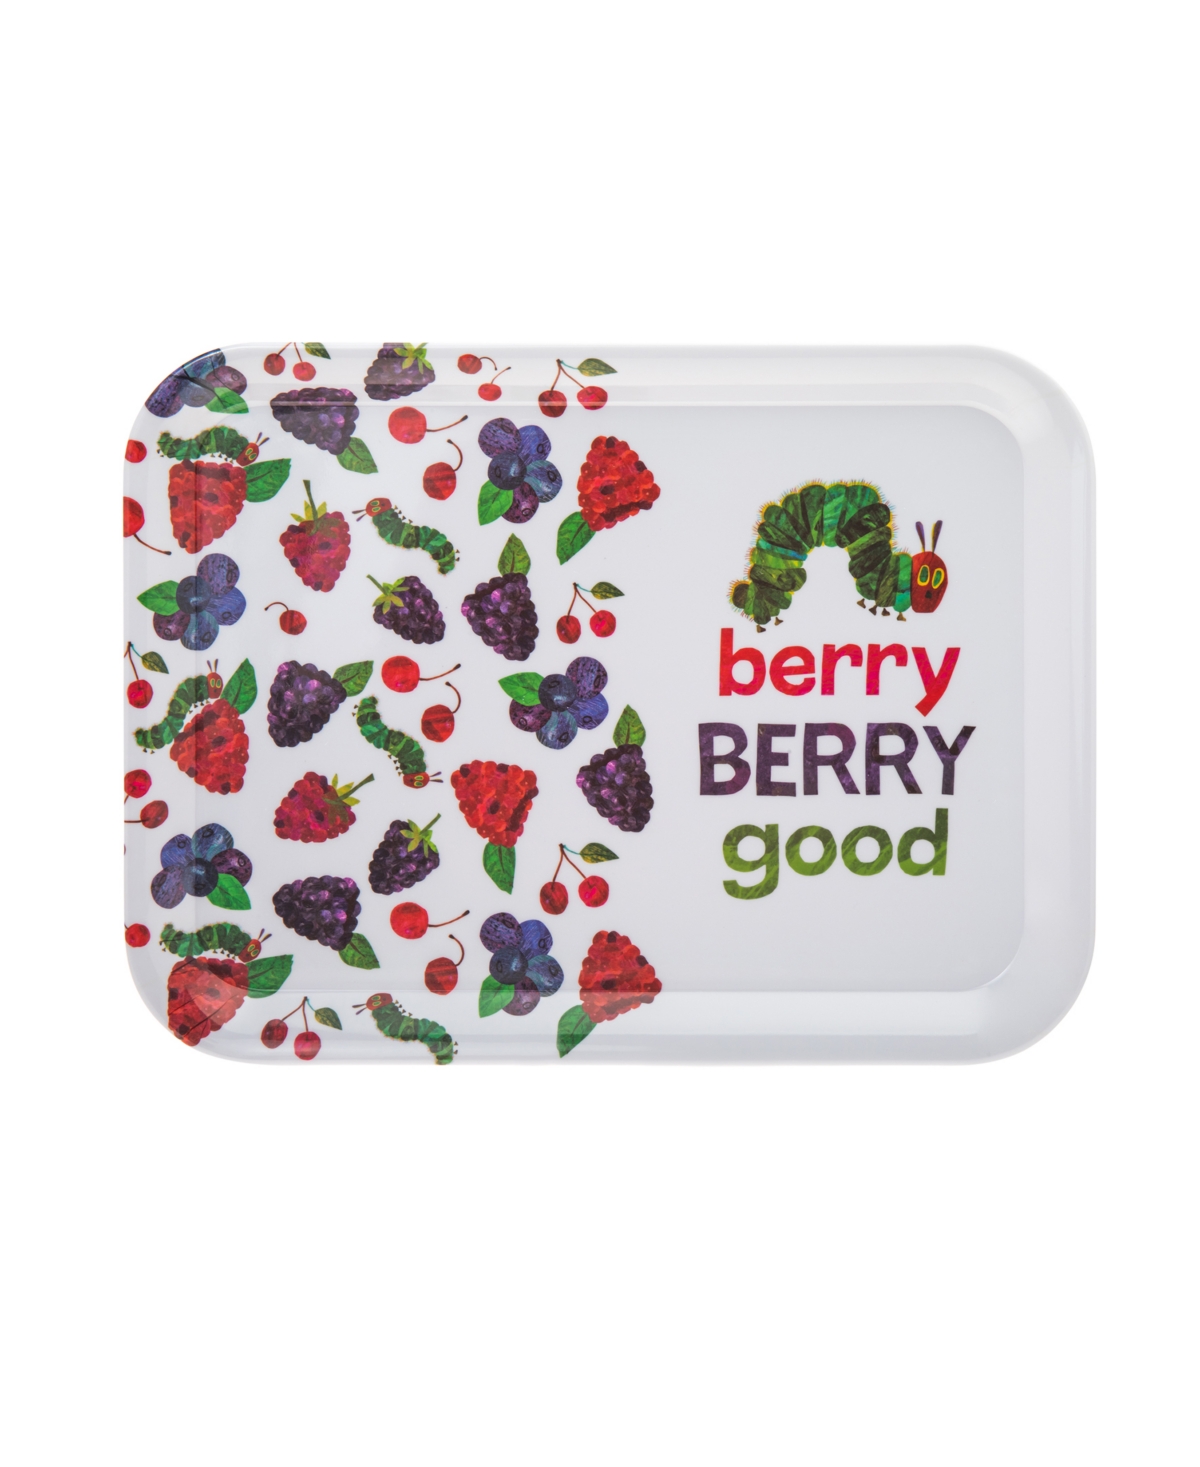 Godinger The World Of Eric Carle, The Very Hungry Caterpillar Berry Berry Good Platter, 15" In White